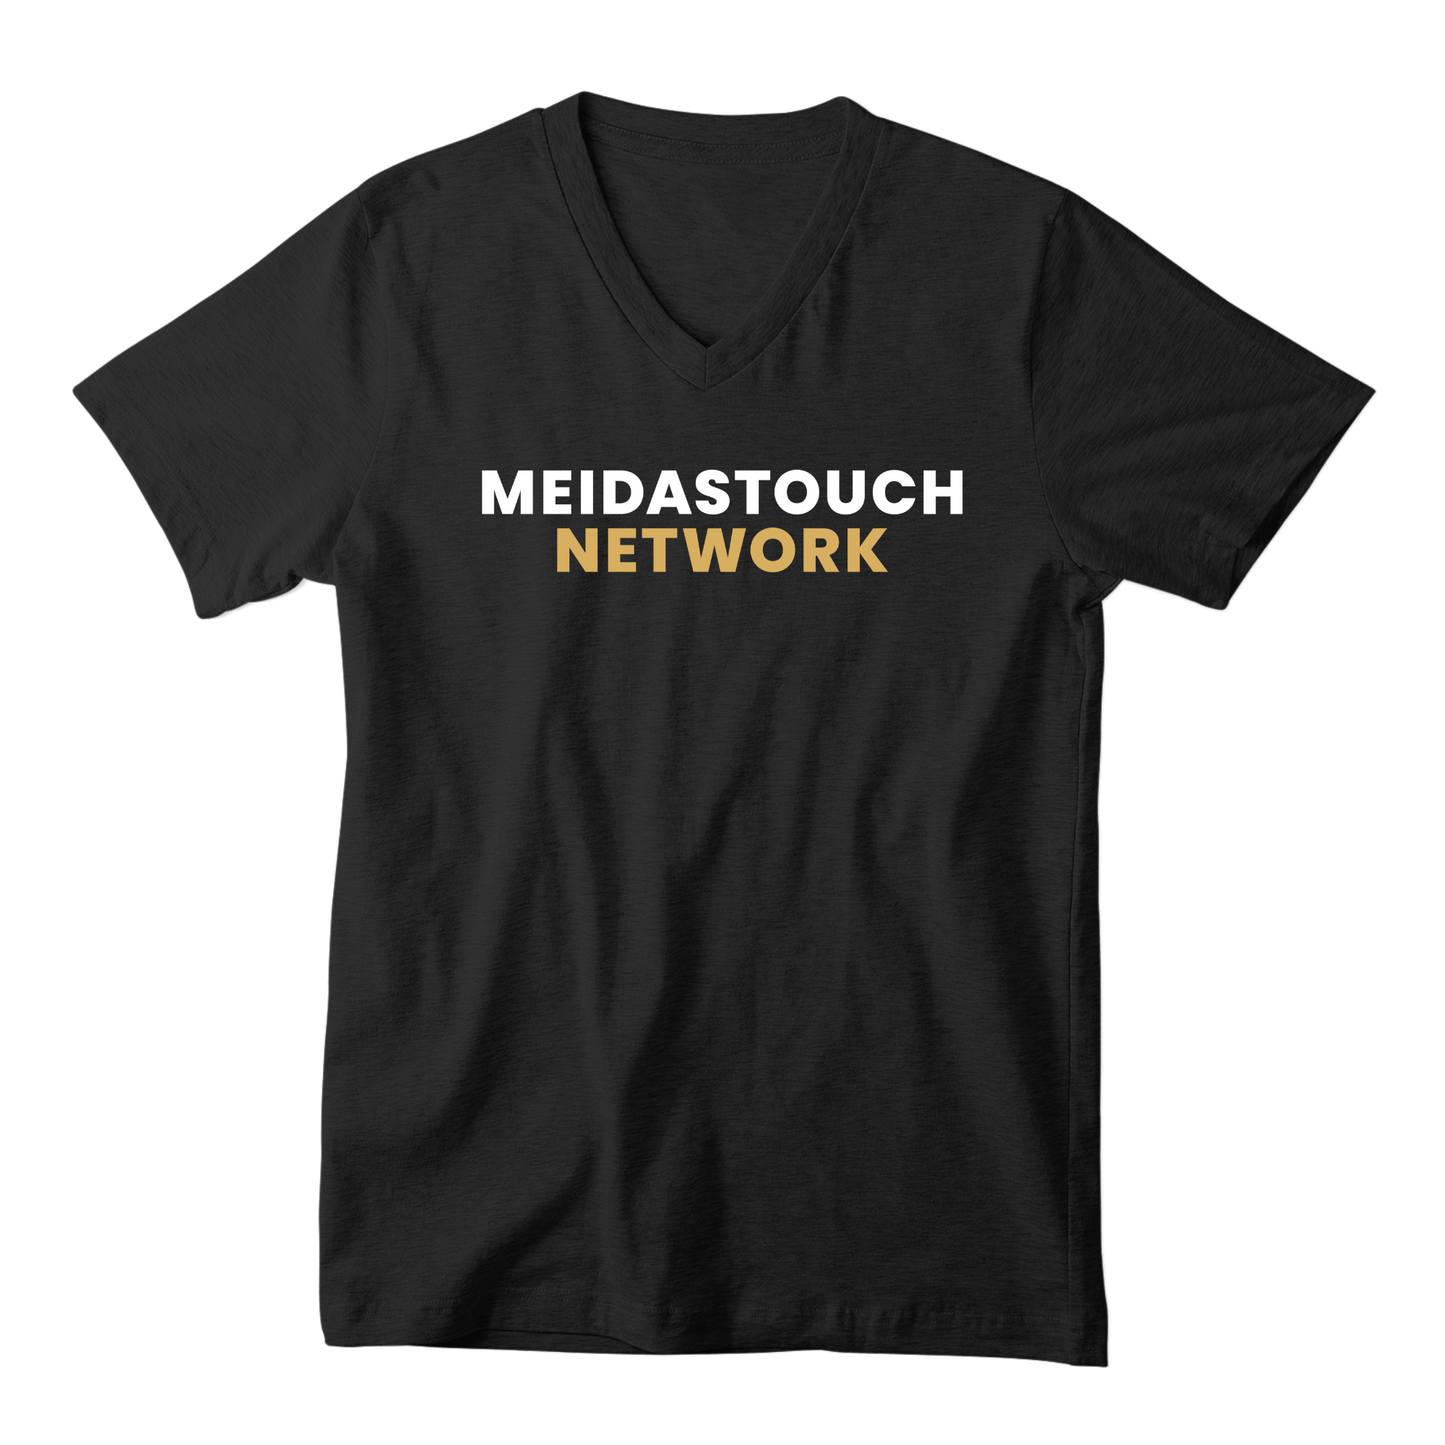 MeidasTouch Network Tee